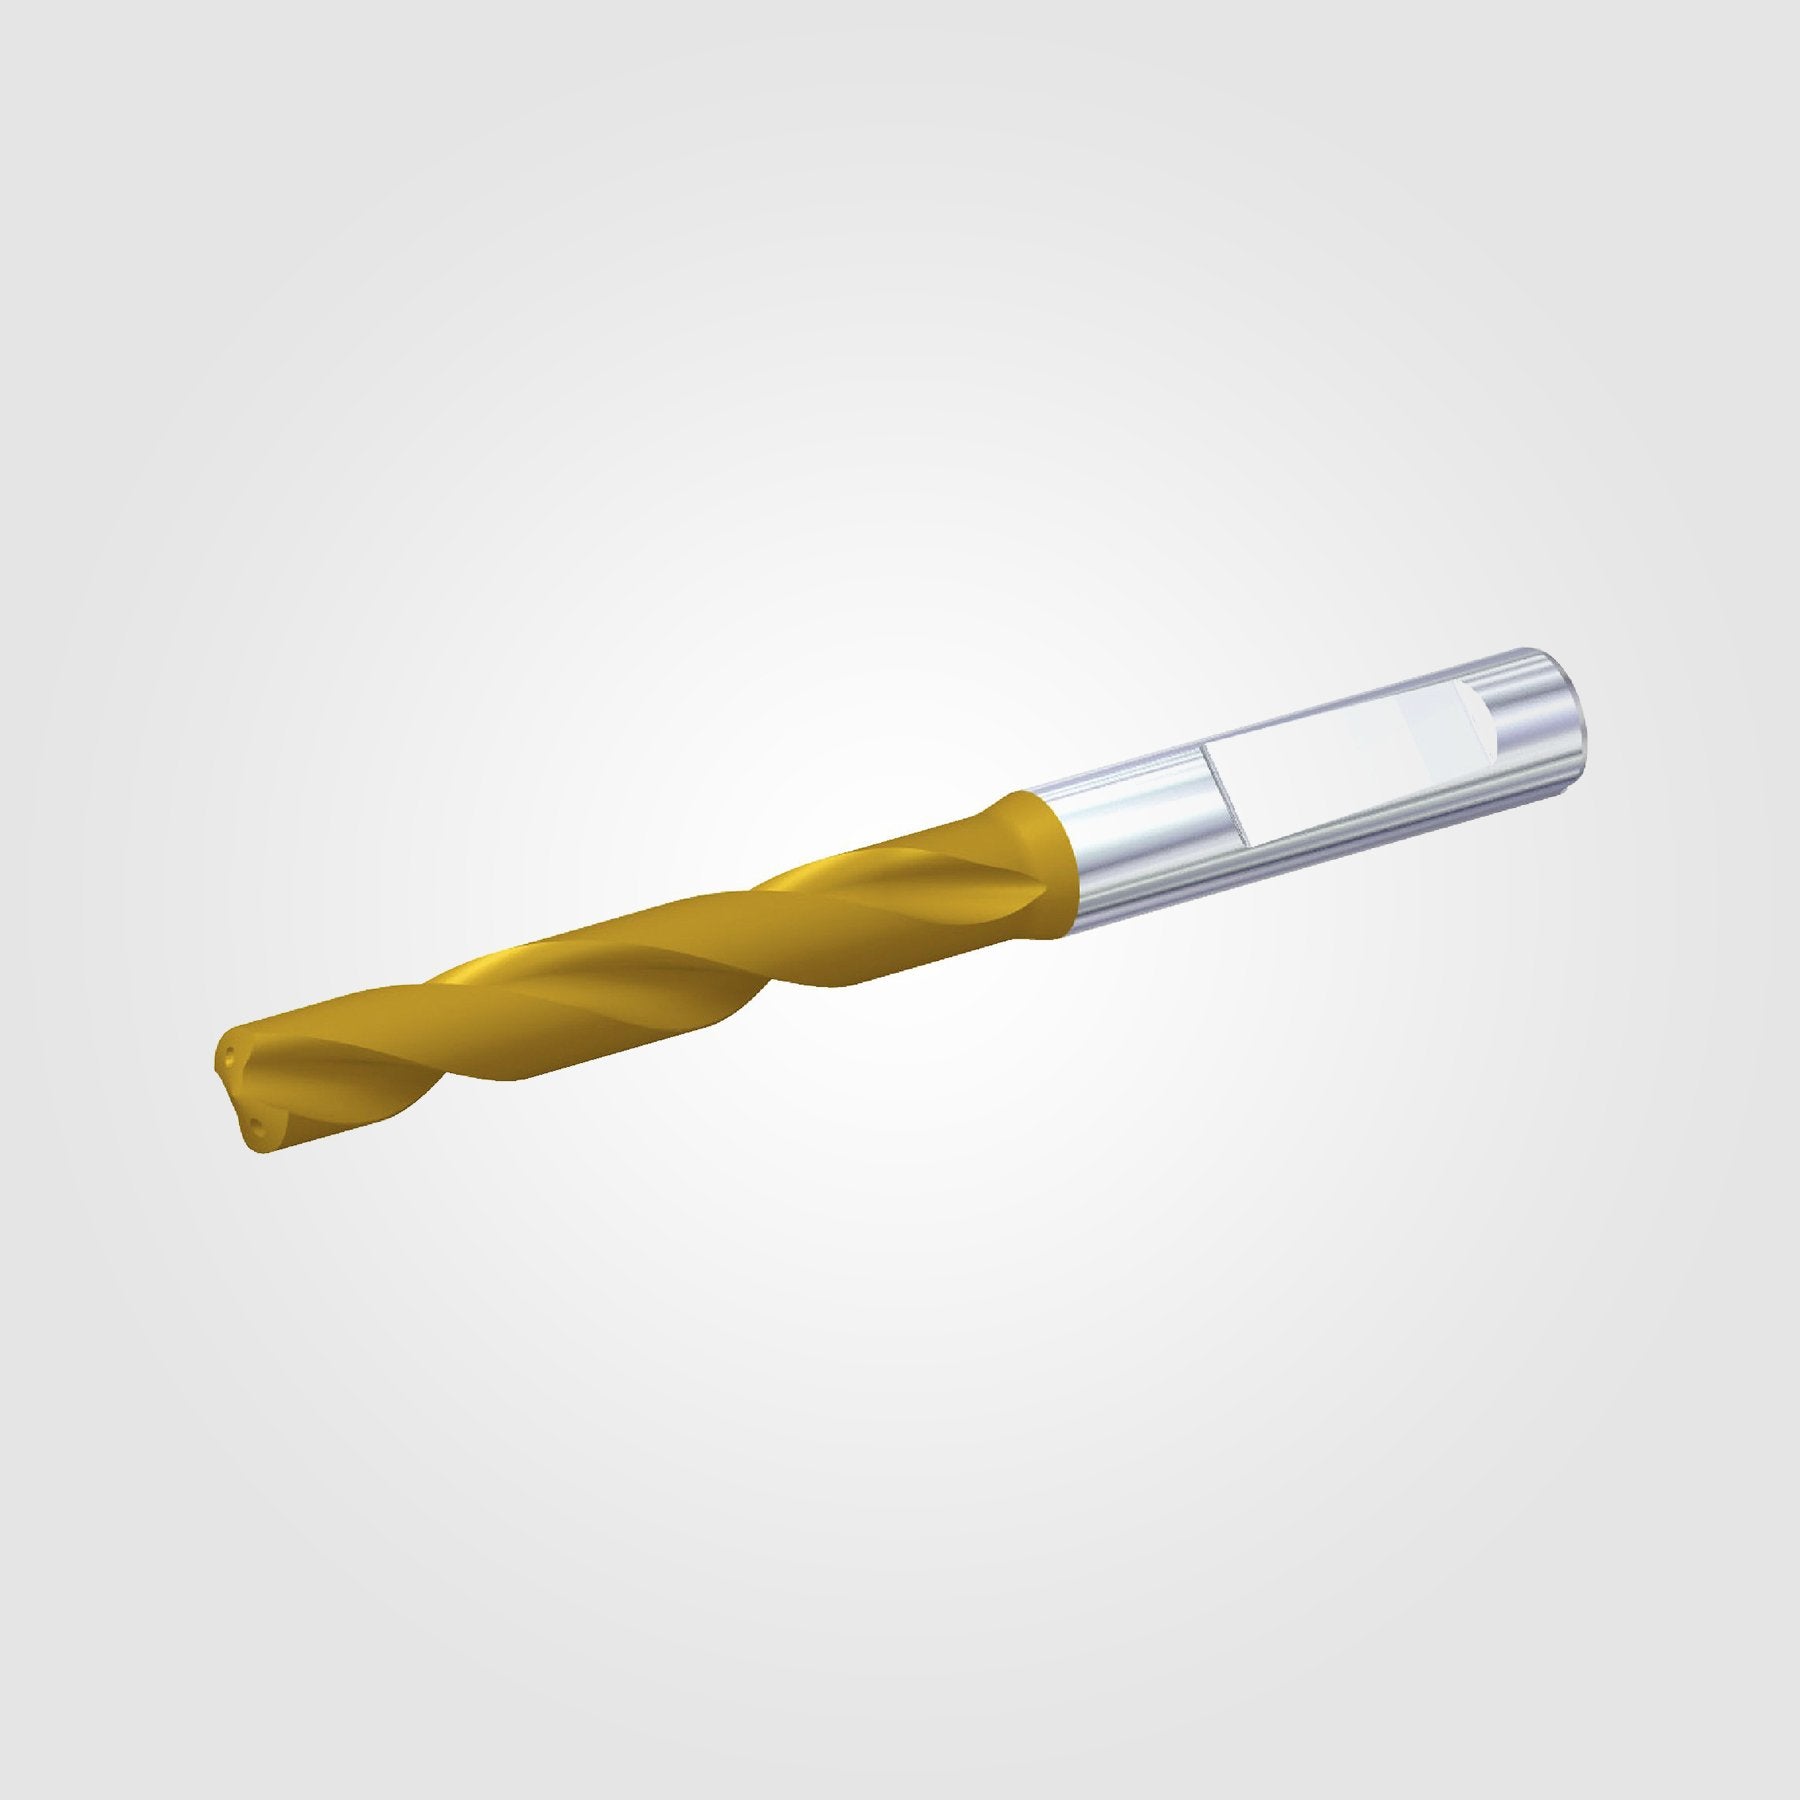 GOdrill (THROUGH COOLANT) | 8mm / .3150" / 3xD | SOLID CARBIDE DRILL | 4148959